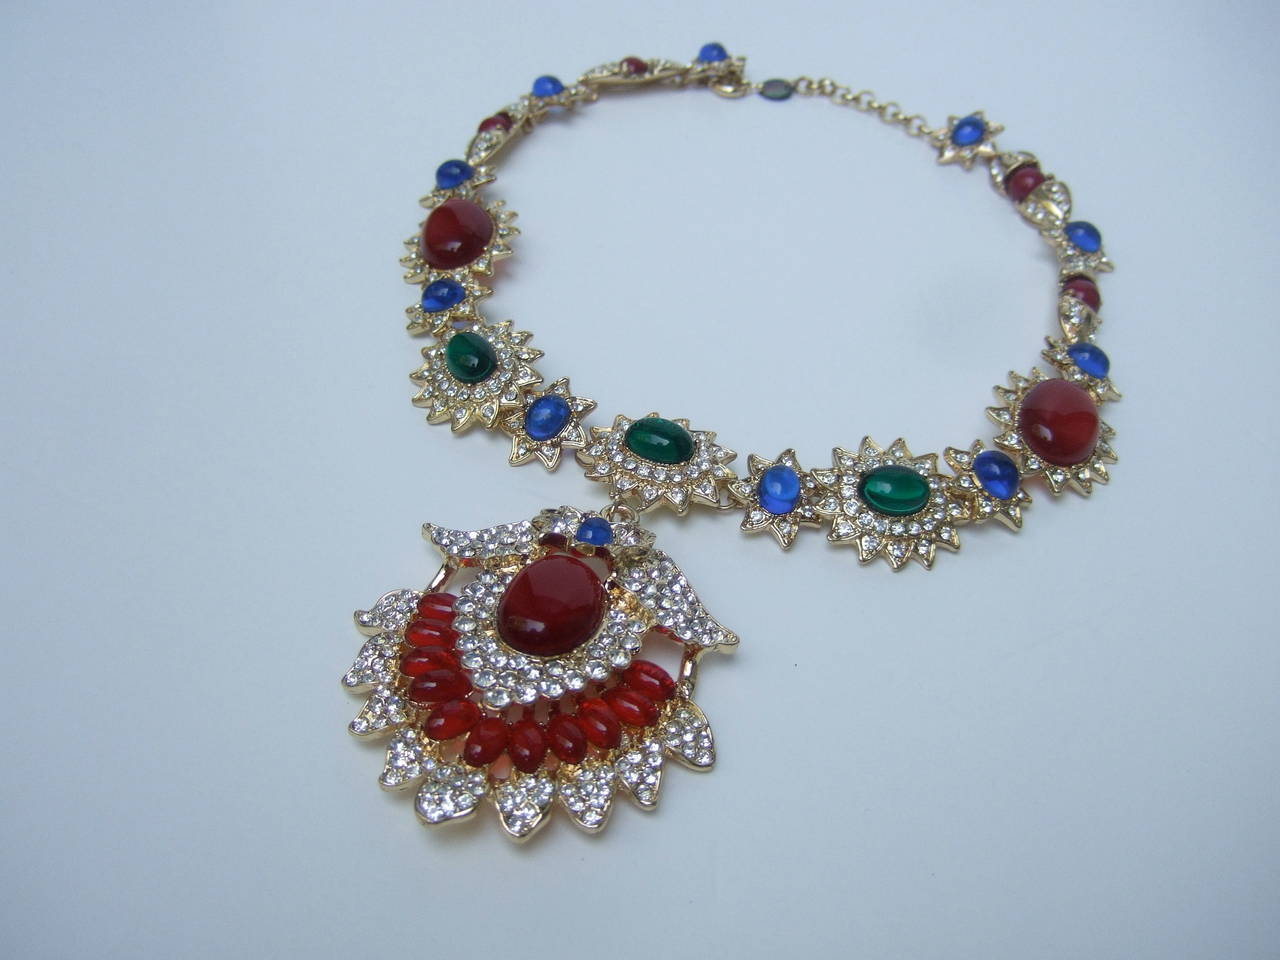 Women's Stunning Jeweled Cabochon & Crystal Necklace